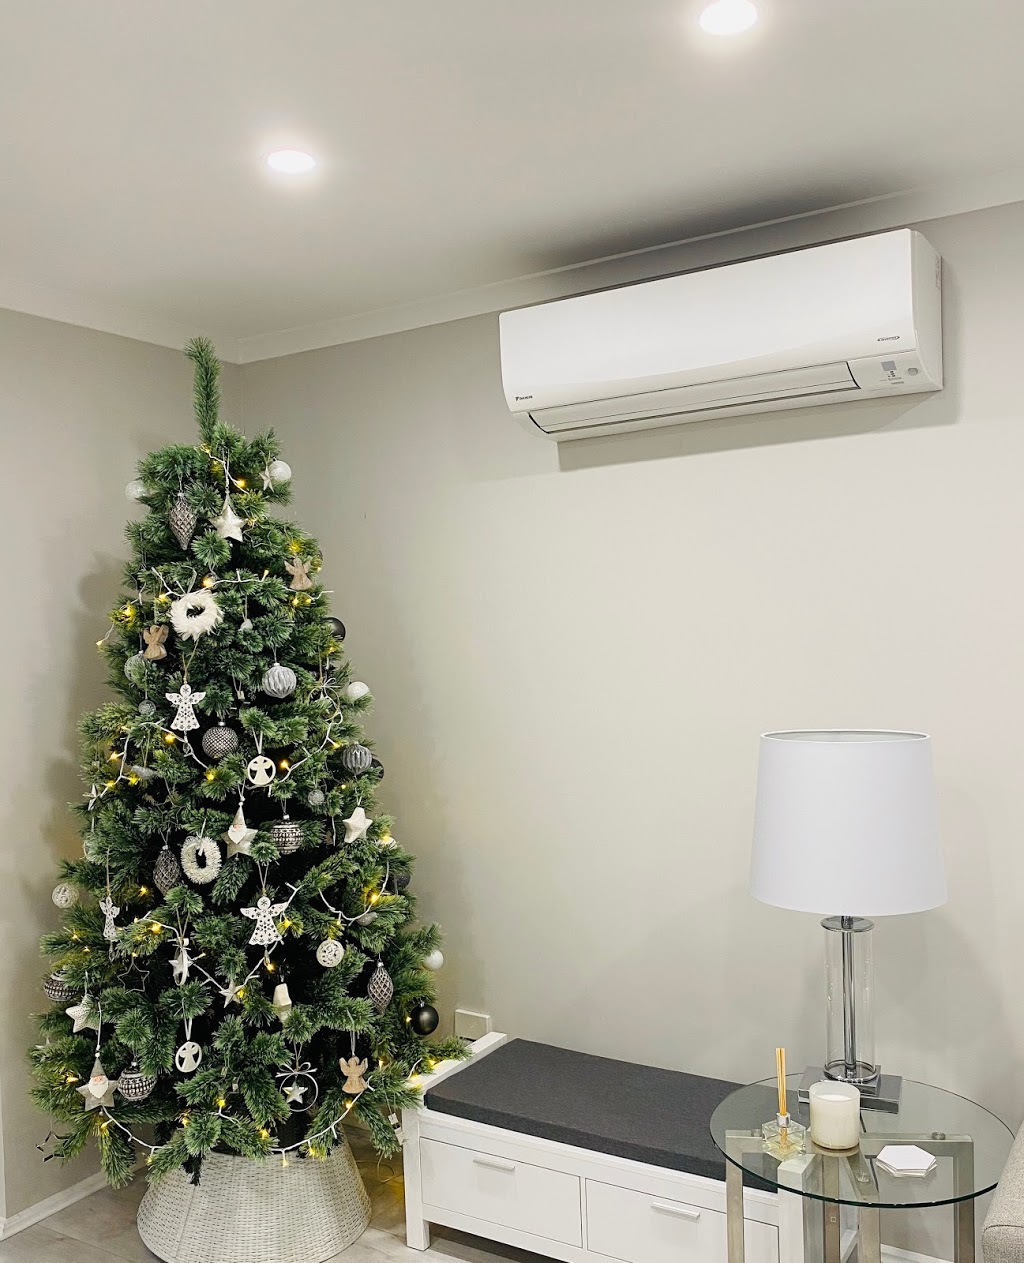 DQ Electrical & Air conditioning Services Pty ltd | 15 Restwell Rd, Bossley Park NSW 2176, Australia | Phone: 0433 893 401